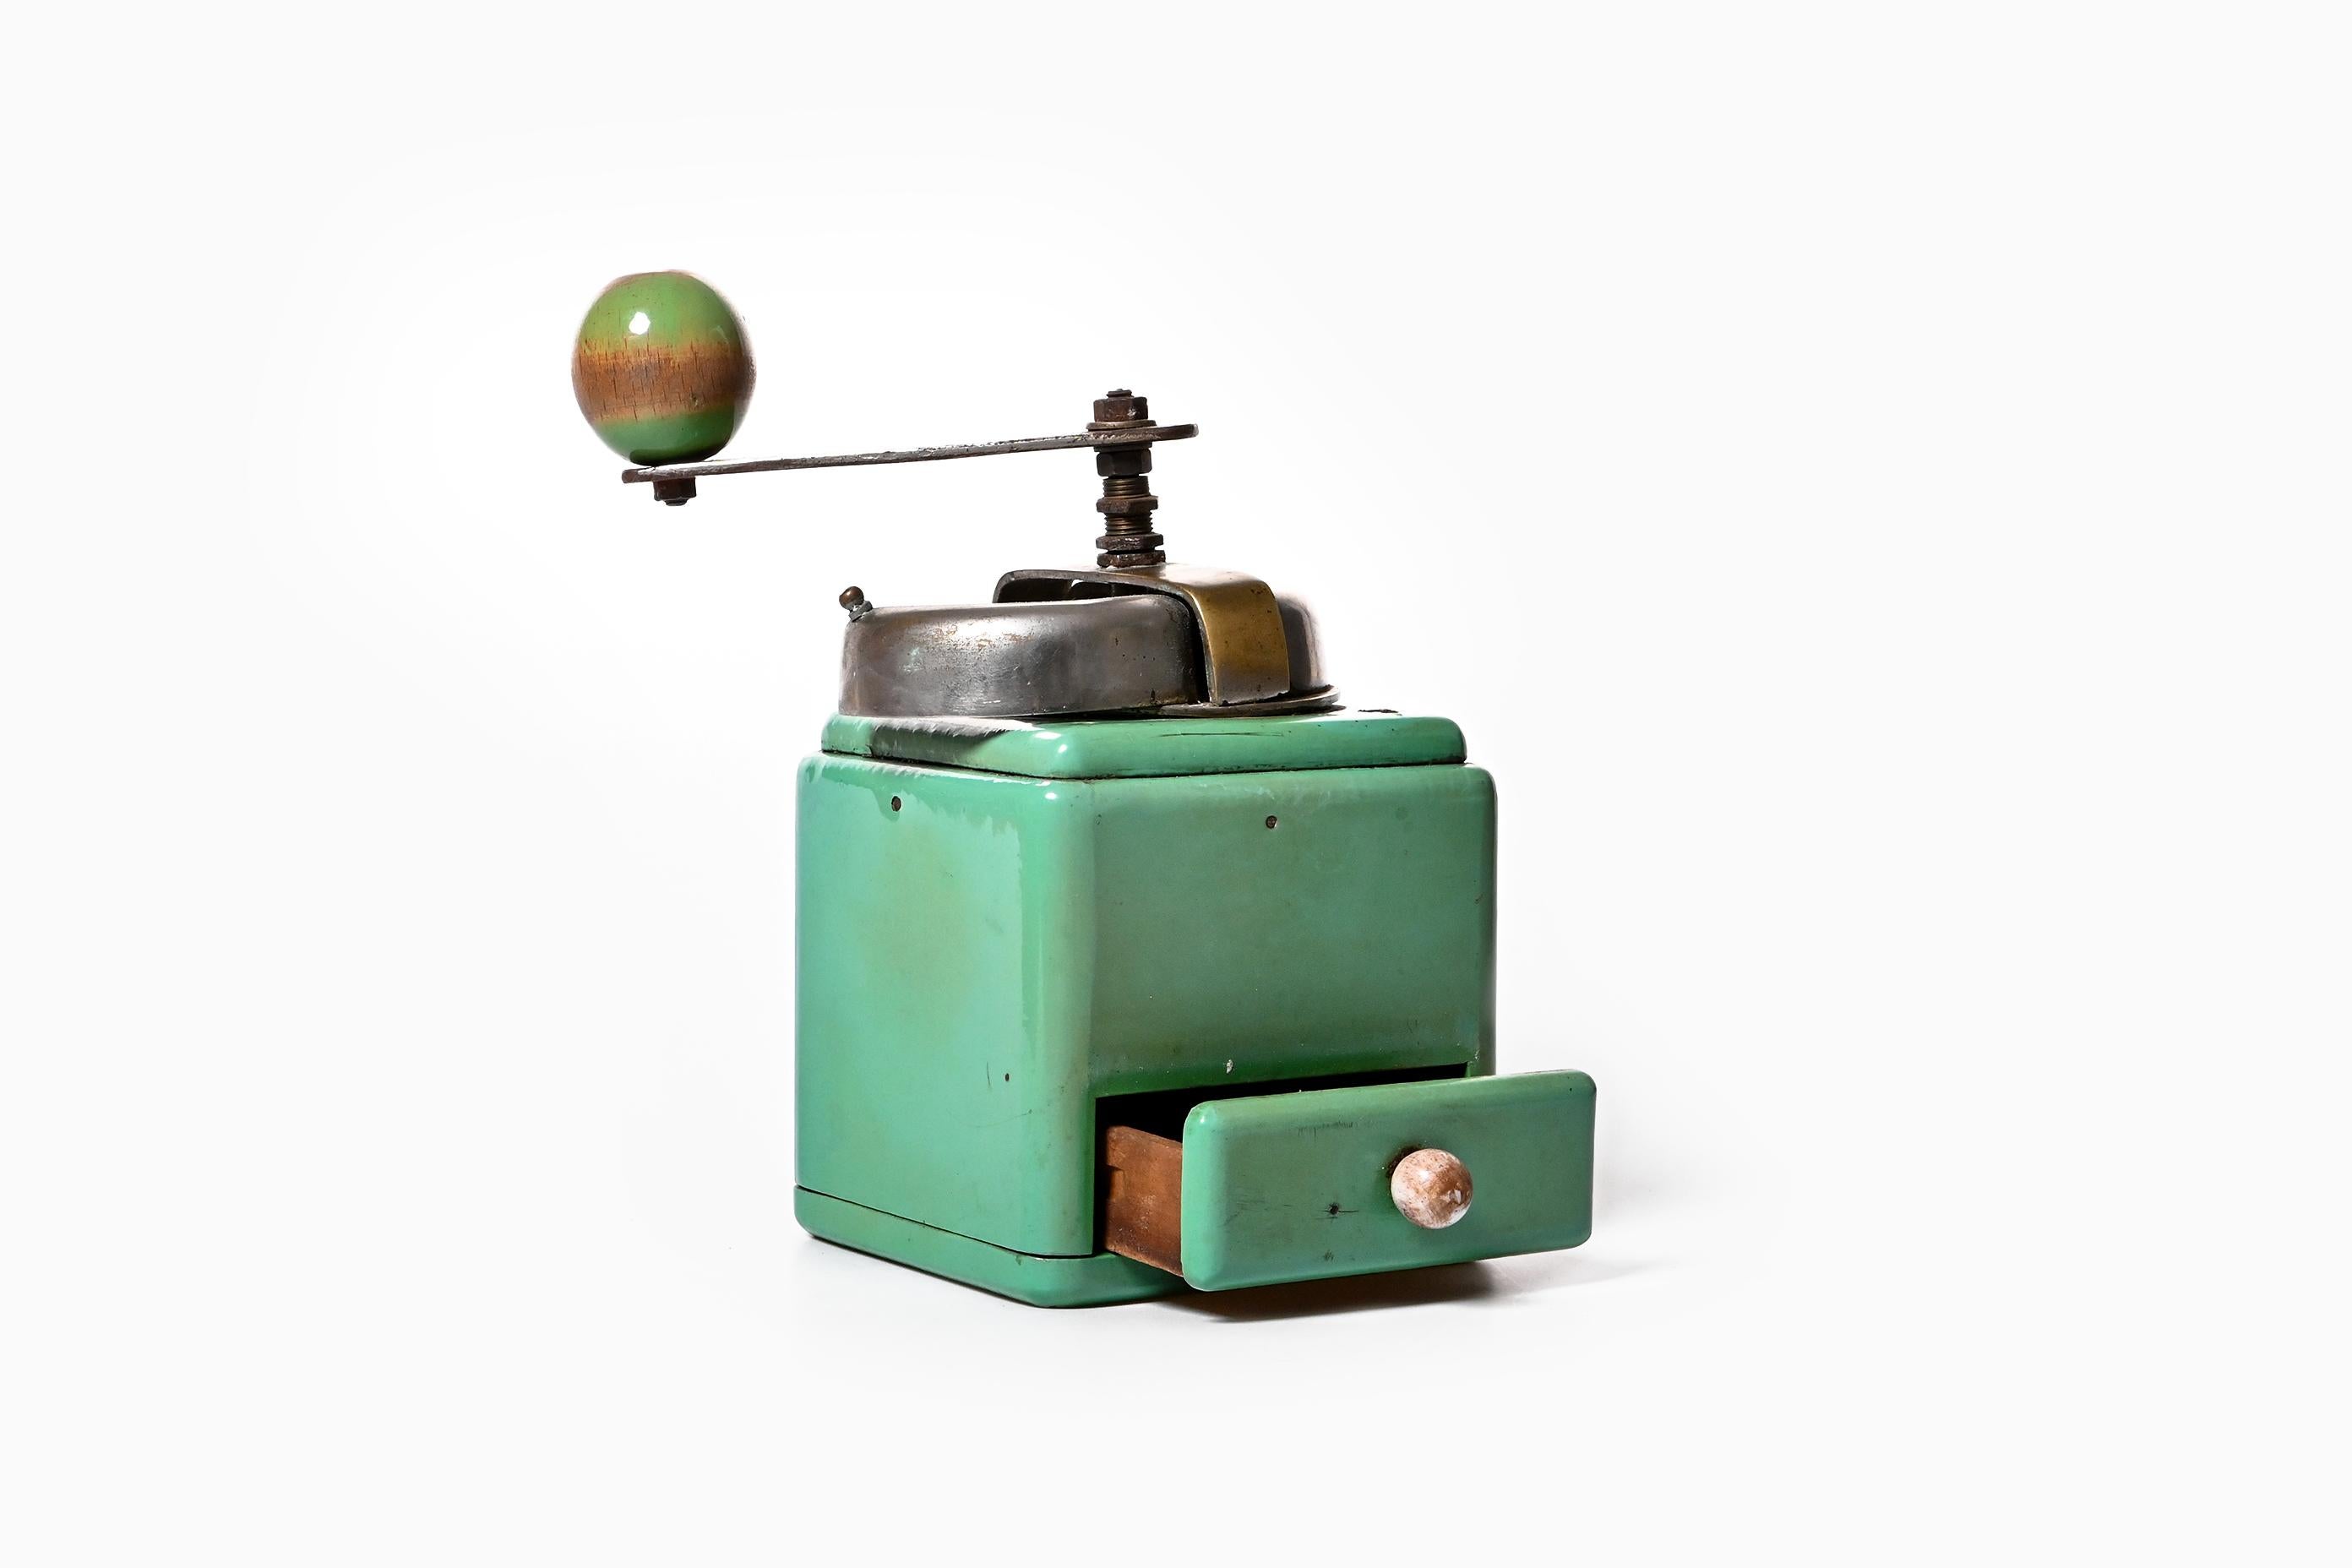 Midcentury styled manual coffee grinder from the 1930s is out for sale. The handcrafted wooden body of the grinder is coated with a mint colored celluloid paint, lending a bright jolly look for this vintage product. The paint around the edges is